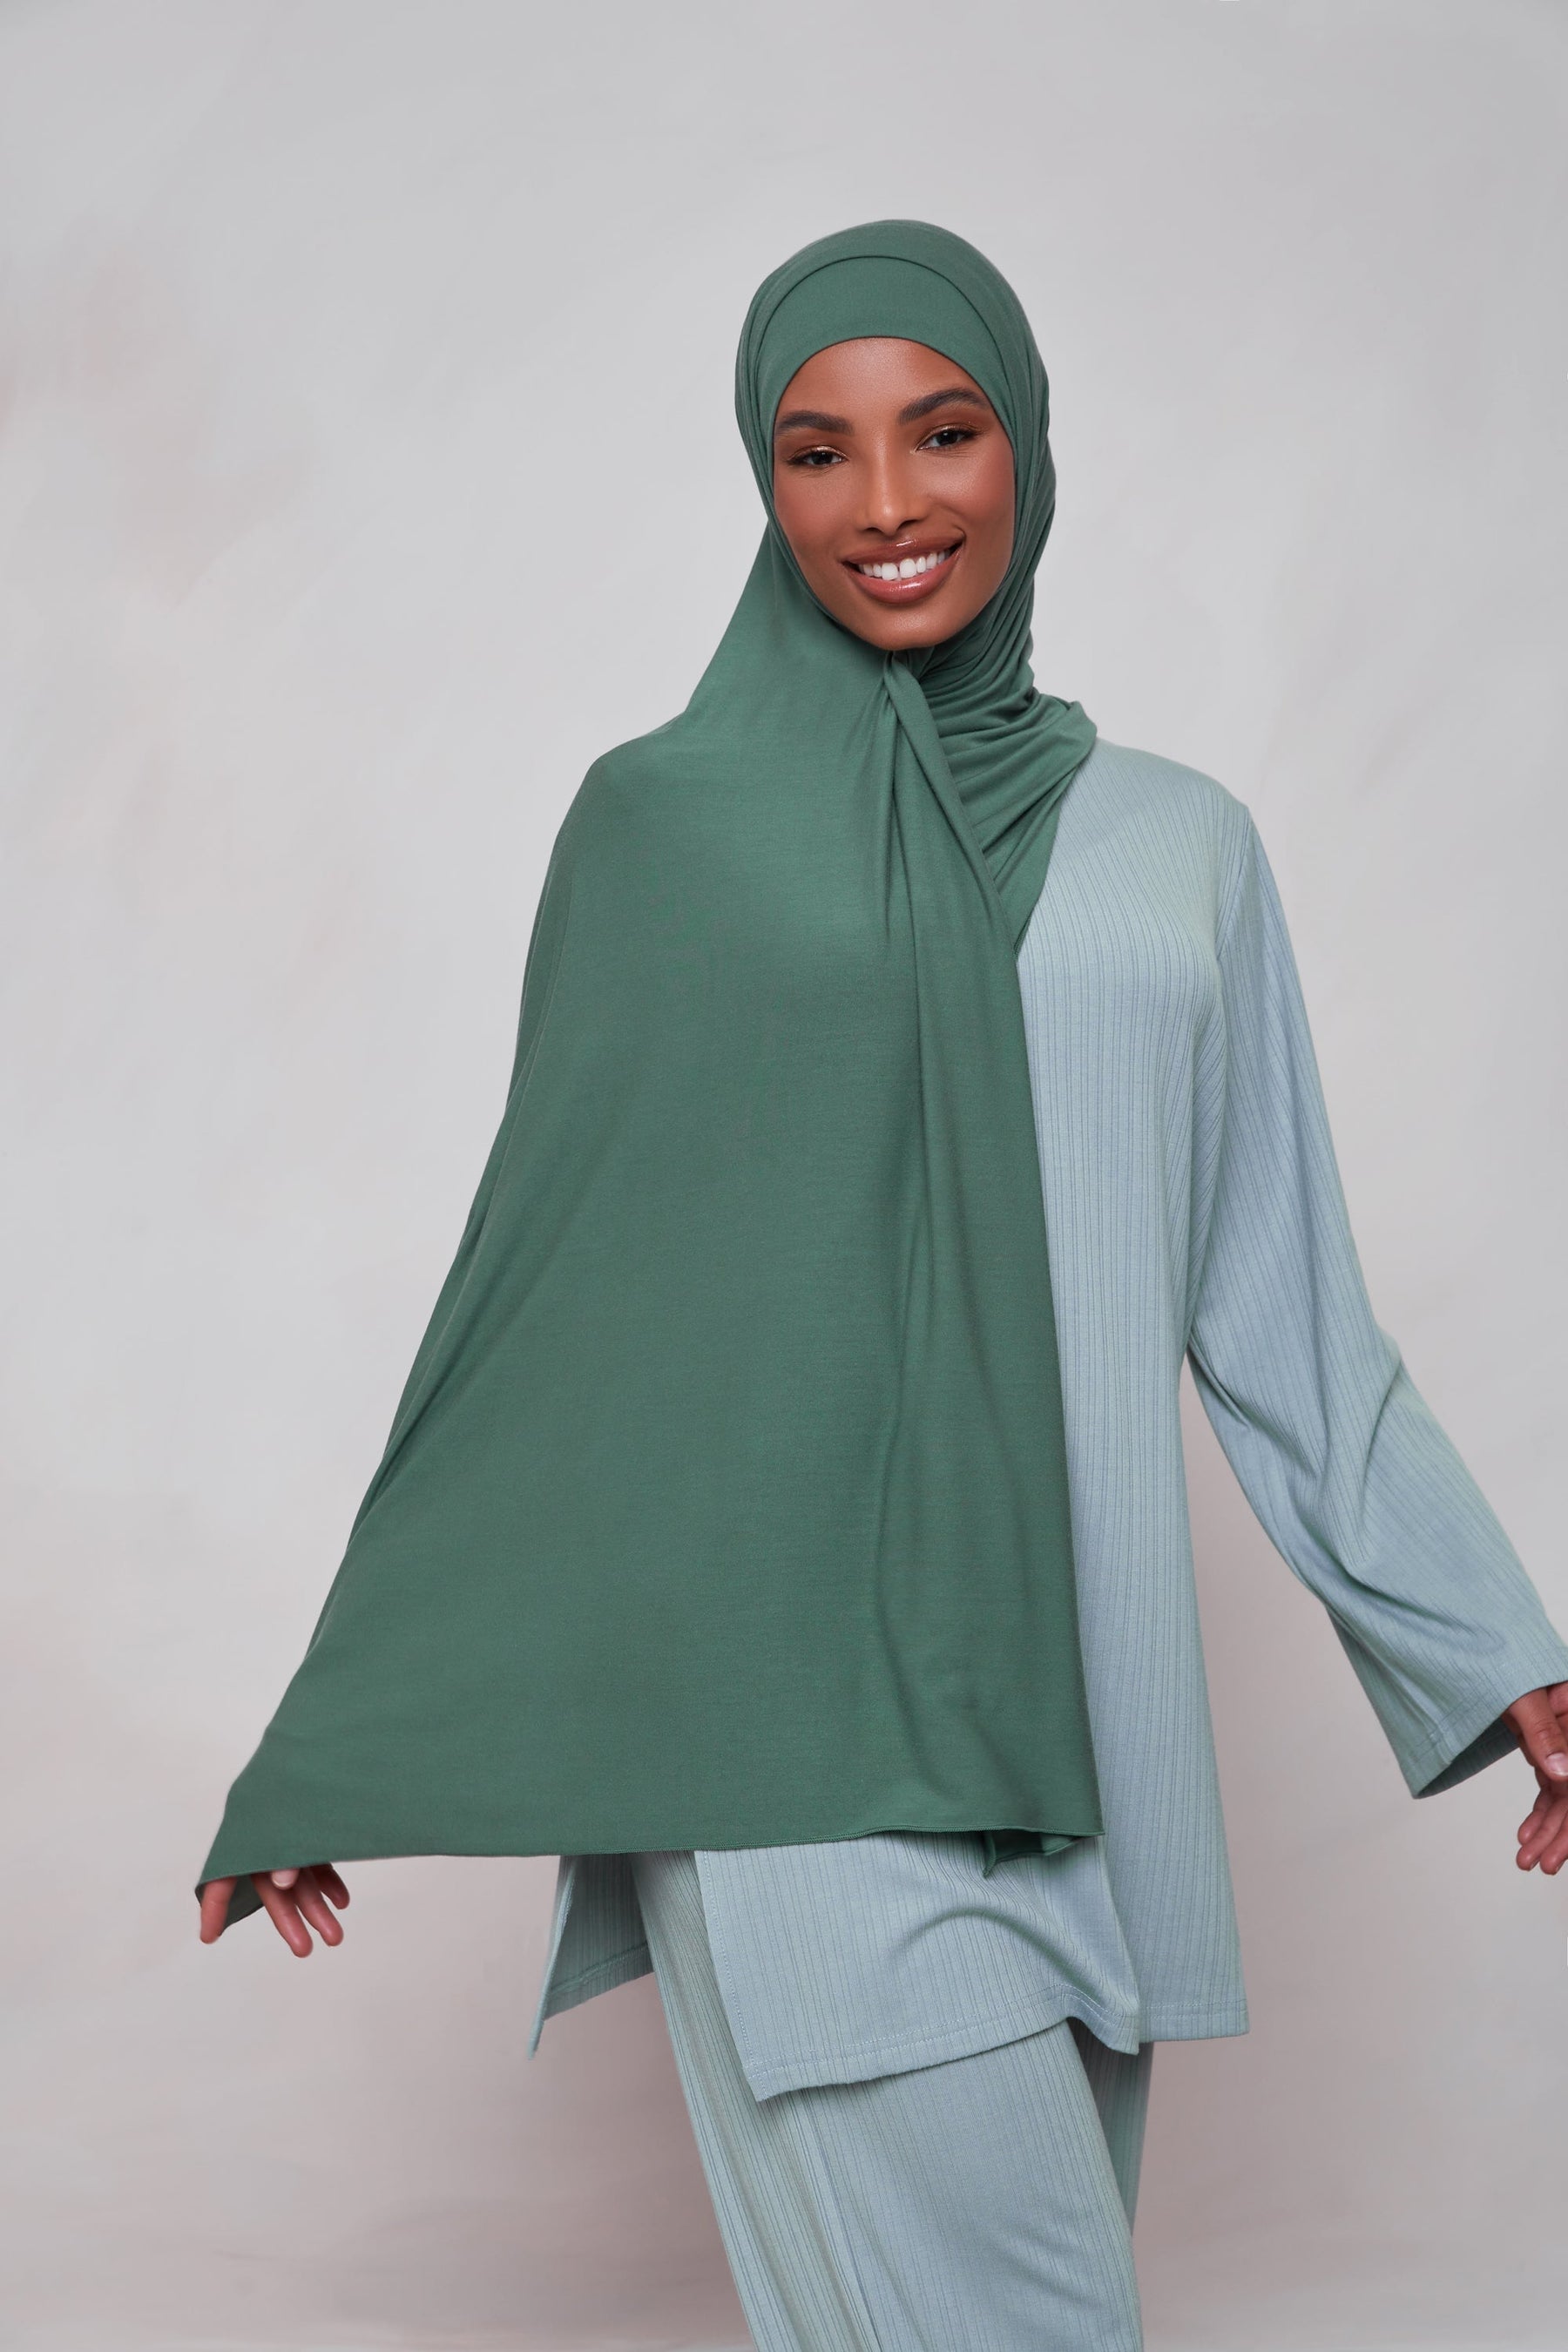 Shop Viscose Jersey Hijab Scarf in Dark Forest Green Color